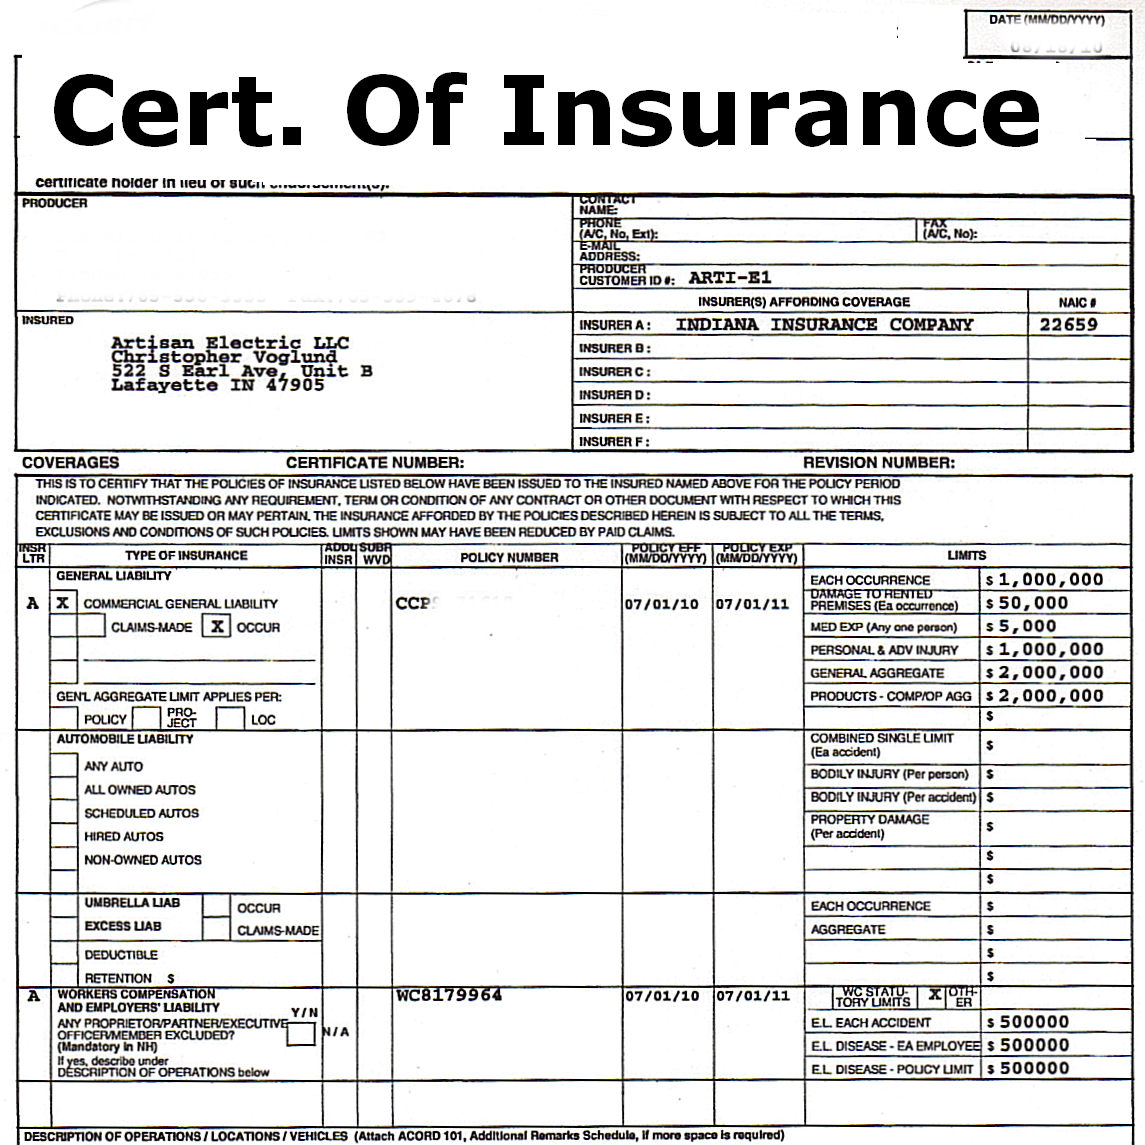 Certificate Of Insurance certificates templates free